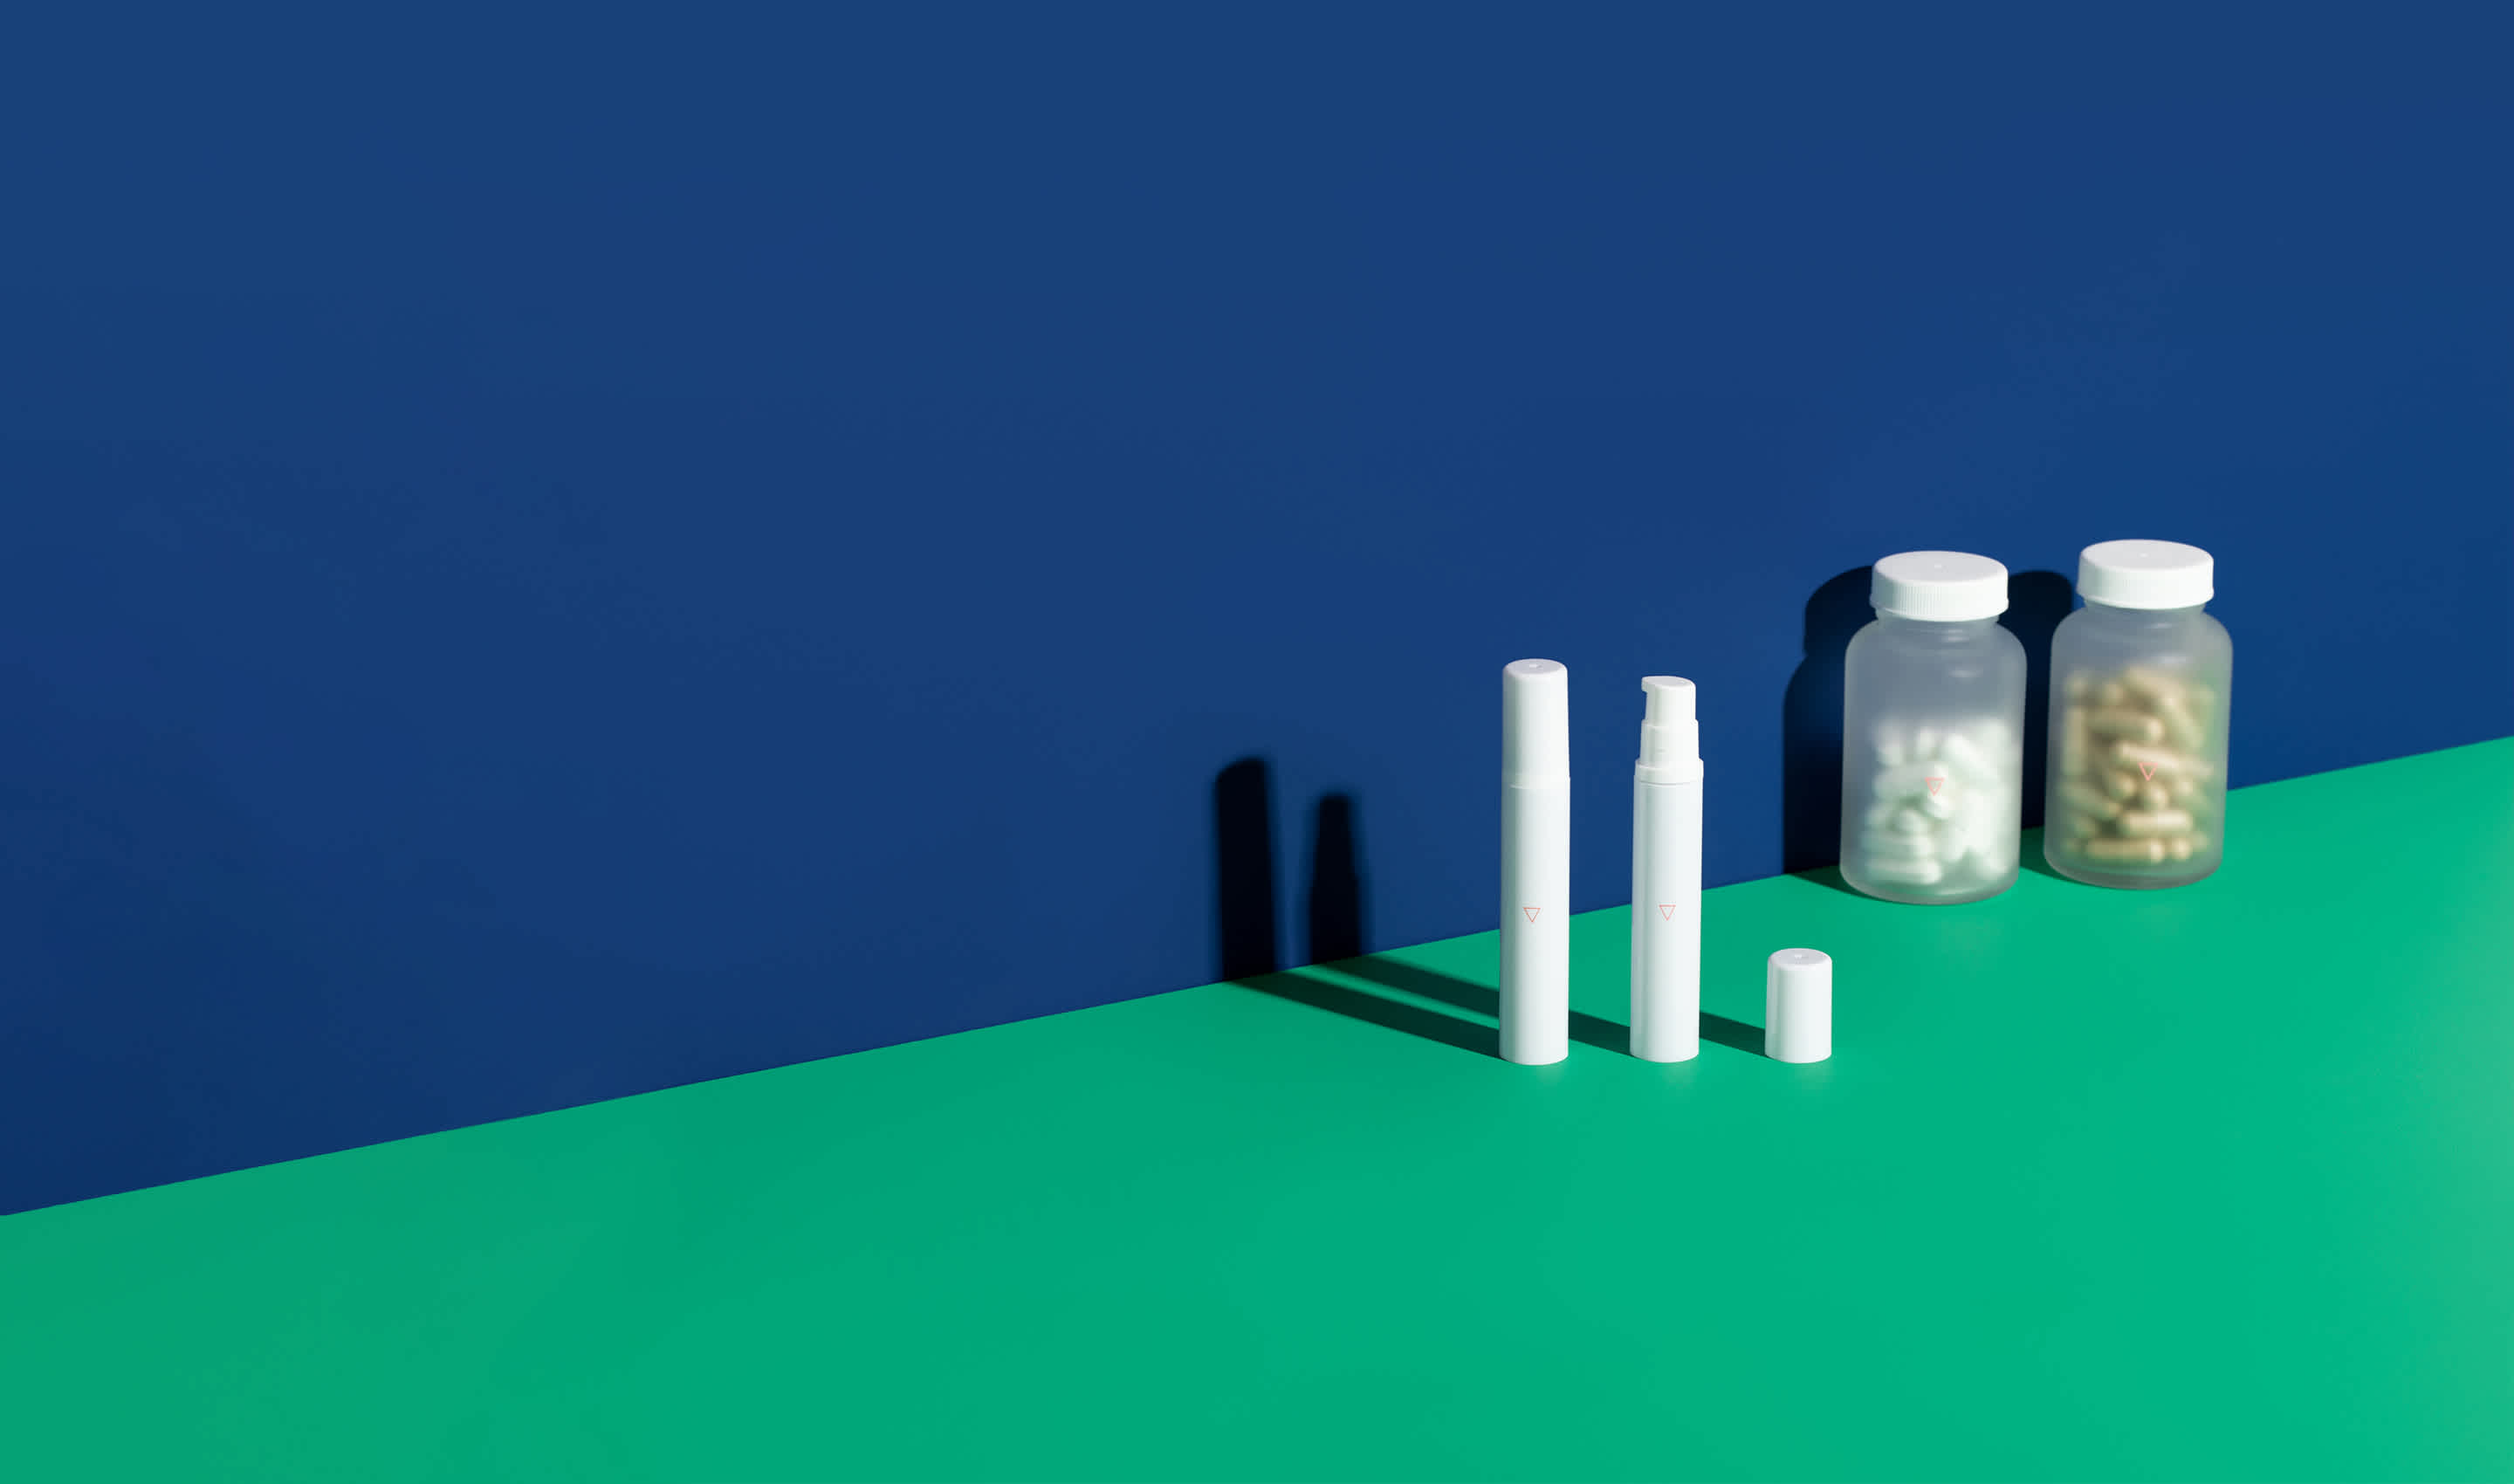 Cold sore medications on a green surface in front of a blue wall